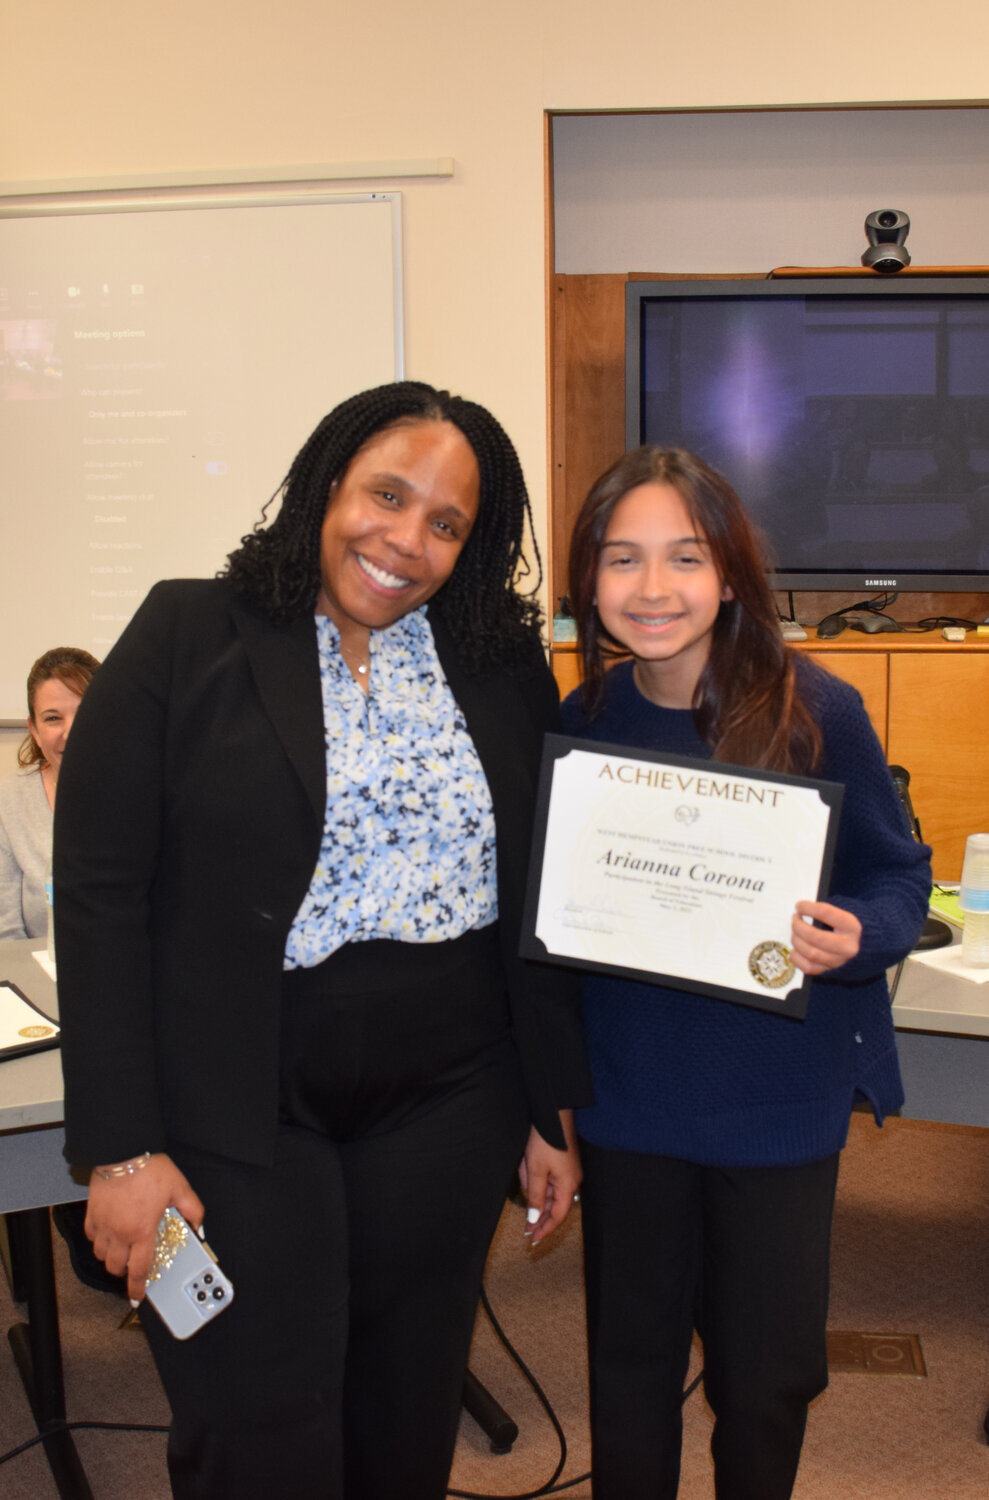 Arianna Corona was recognized for participating in the Long Island String Festival Association’s festivals.